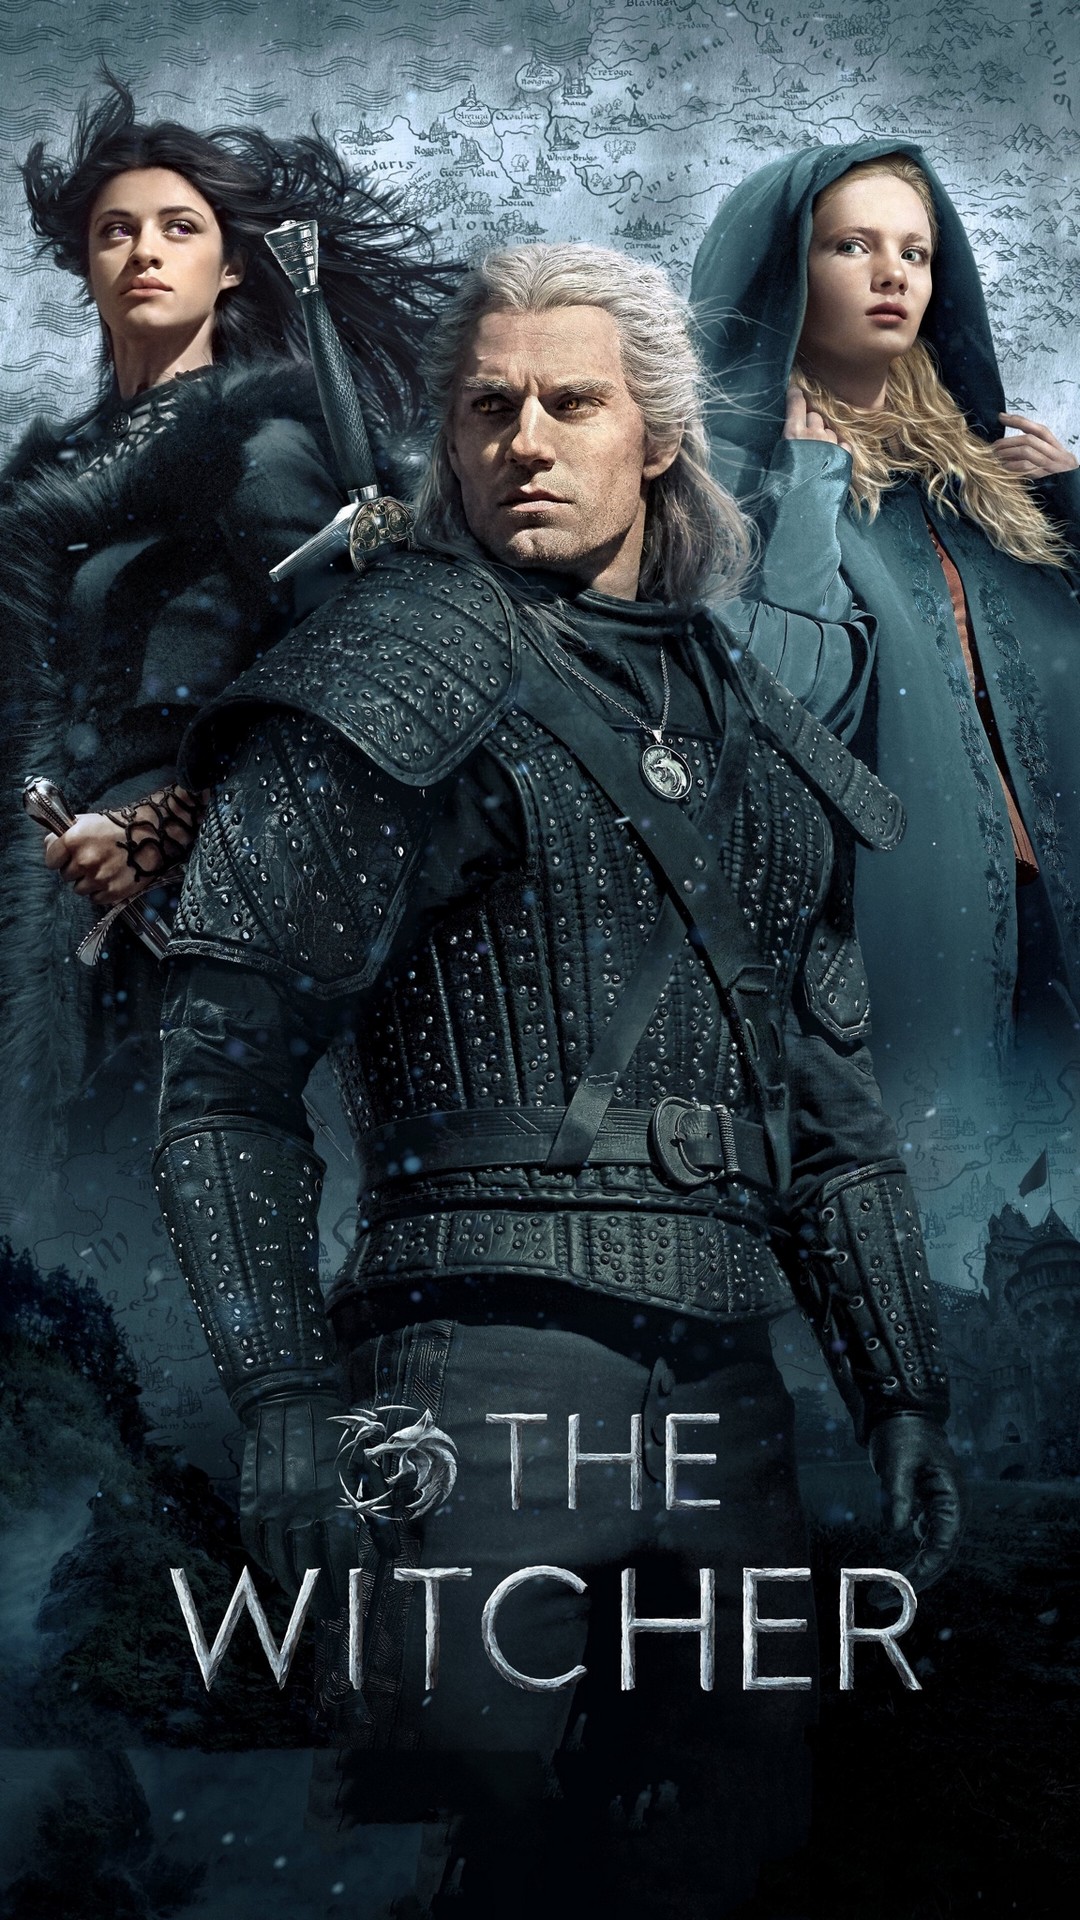 Wallpaper The Witcher Android With high-resolution 1080X1920 pixel. You can use this wallpaper for your Android backgrounds, Tablet, Samsung Screensavers, Mobile Phone Lock Screen and another Smartphones device